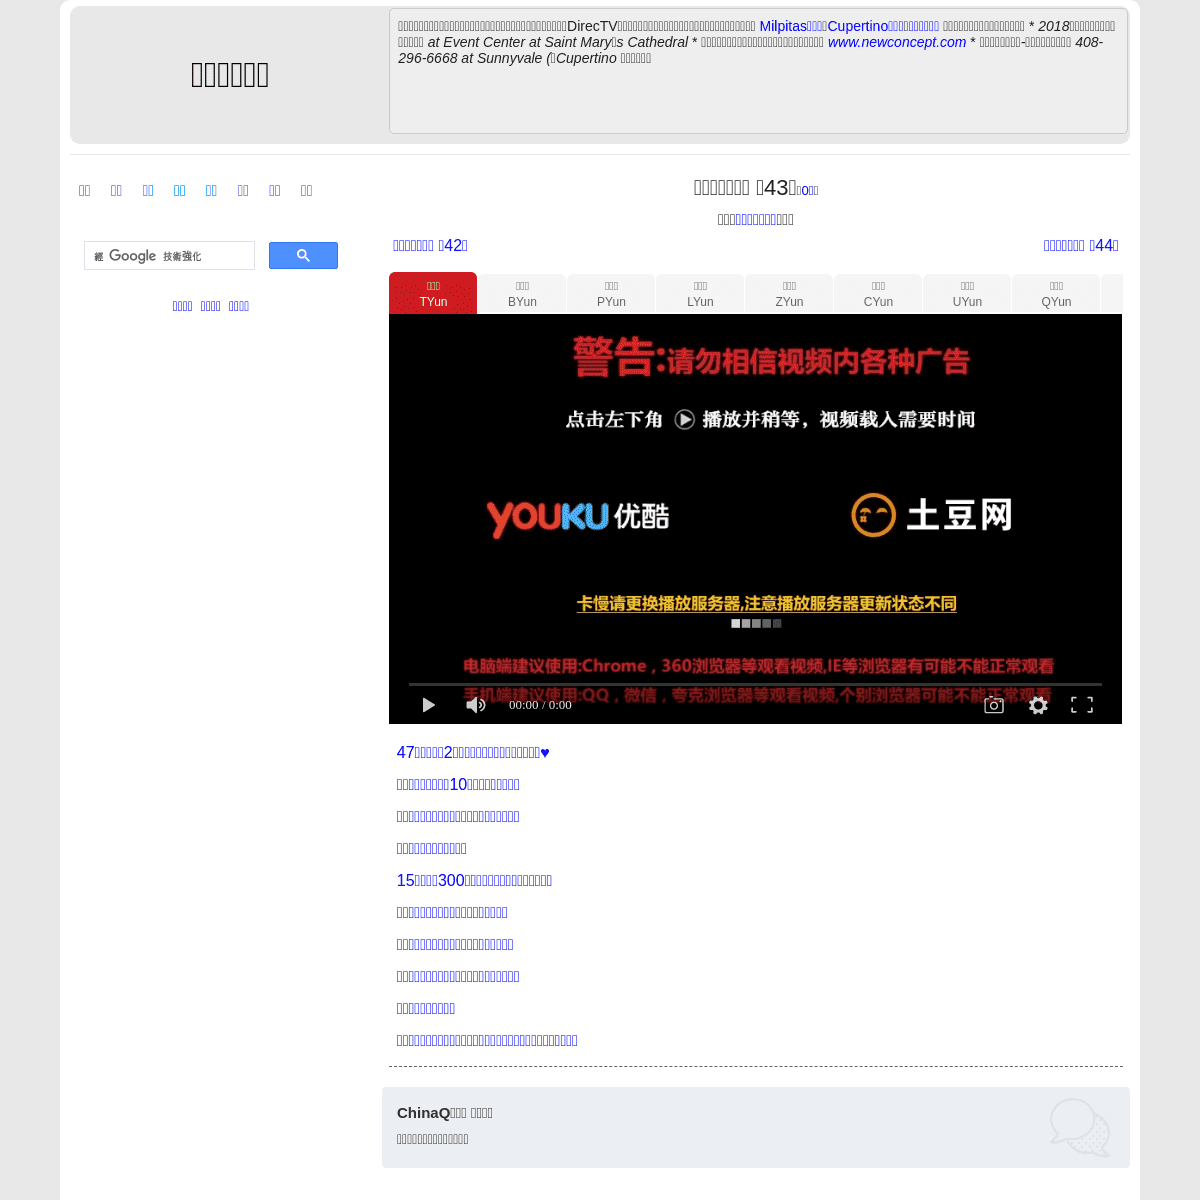 A complete backup of https://chinaq.tv/cn190508/43.html